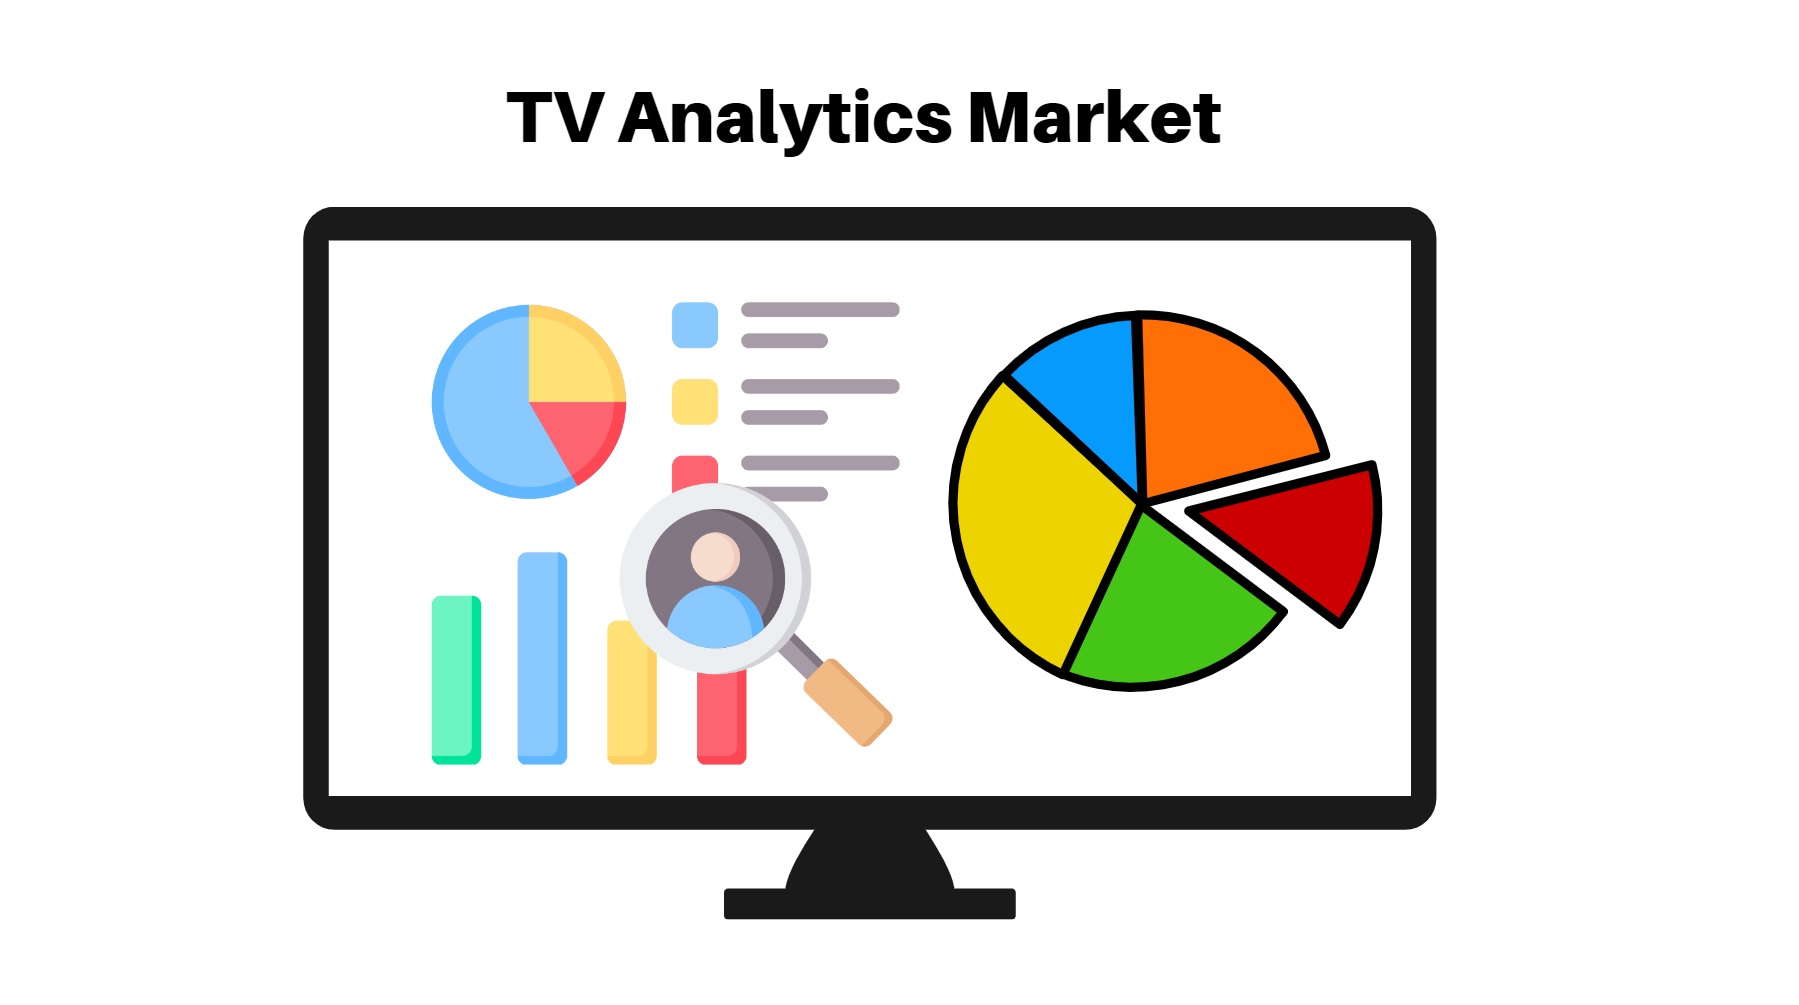 TV Analytics Market Size is valued at USD 3.12 billion in 2023, growing at a CAGR of 21.2%